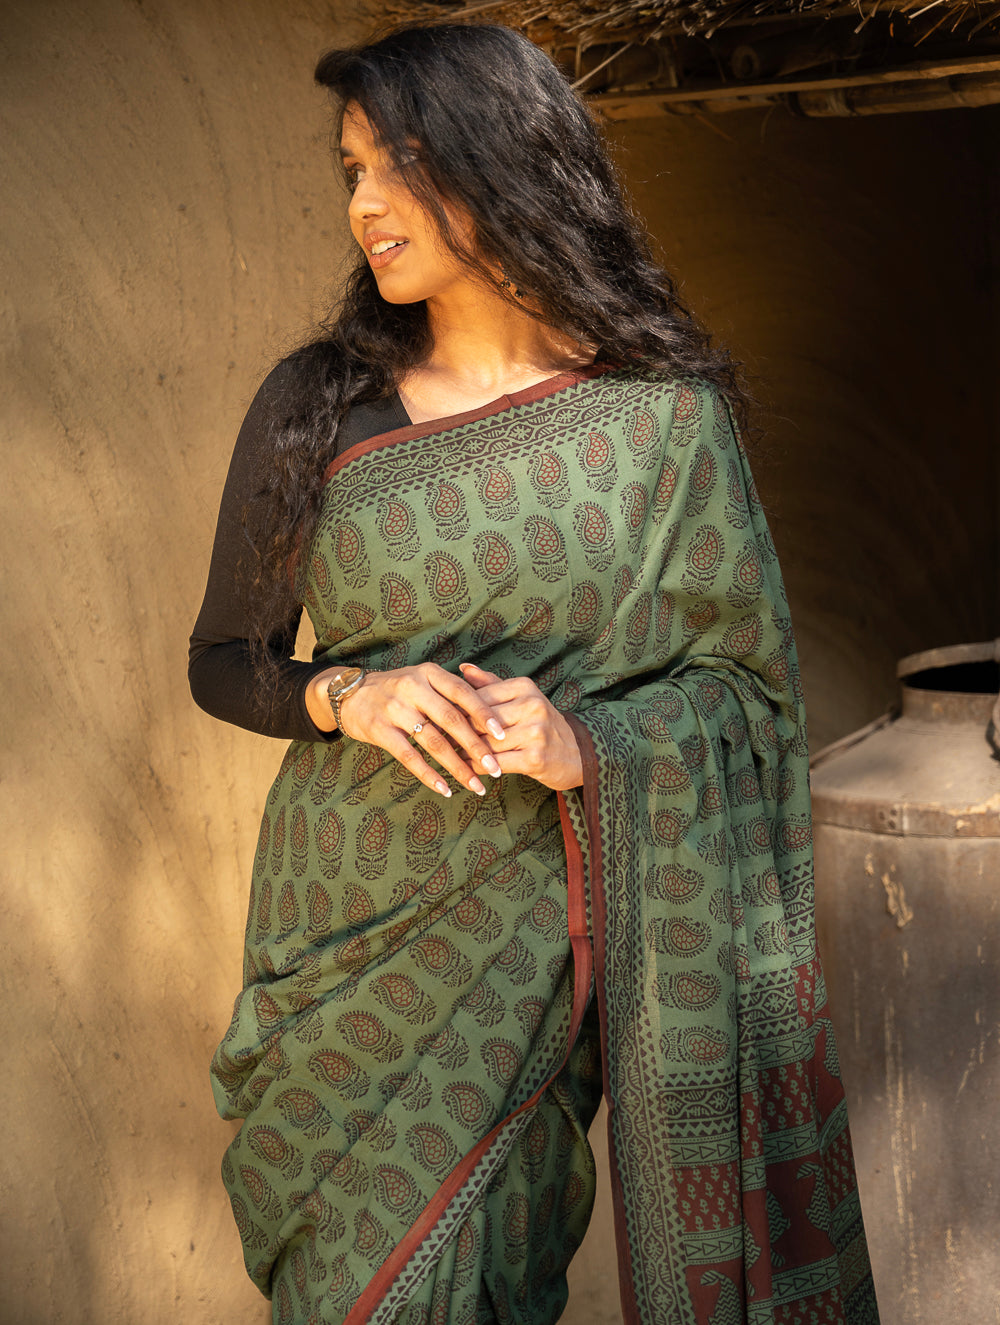 Load image into Gallery viewer, Exclusive Bagh Hand Block Printed Cotton Saree - Paisleys 